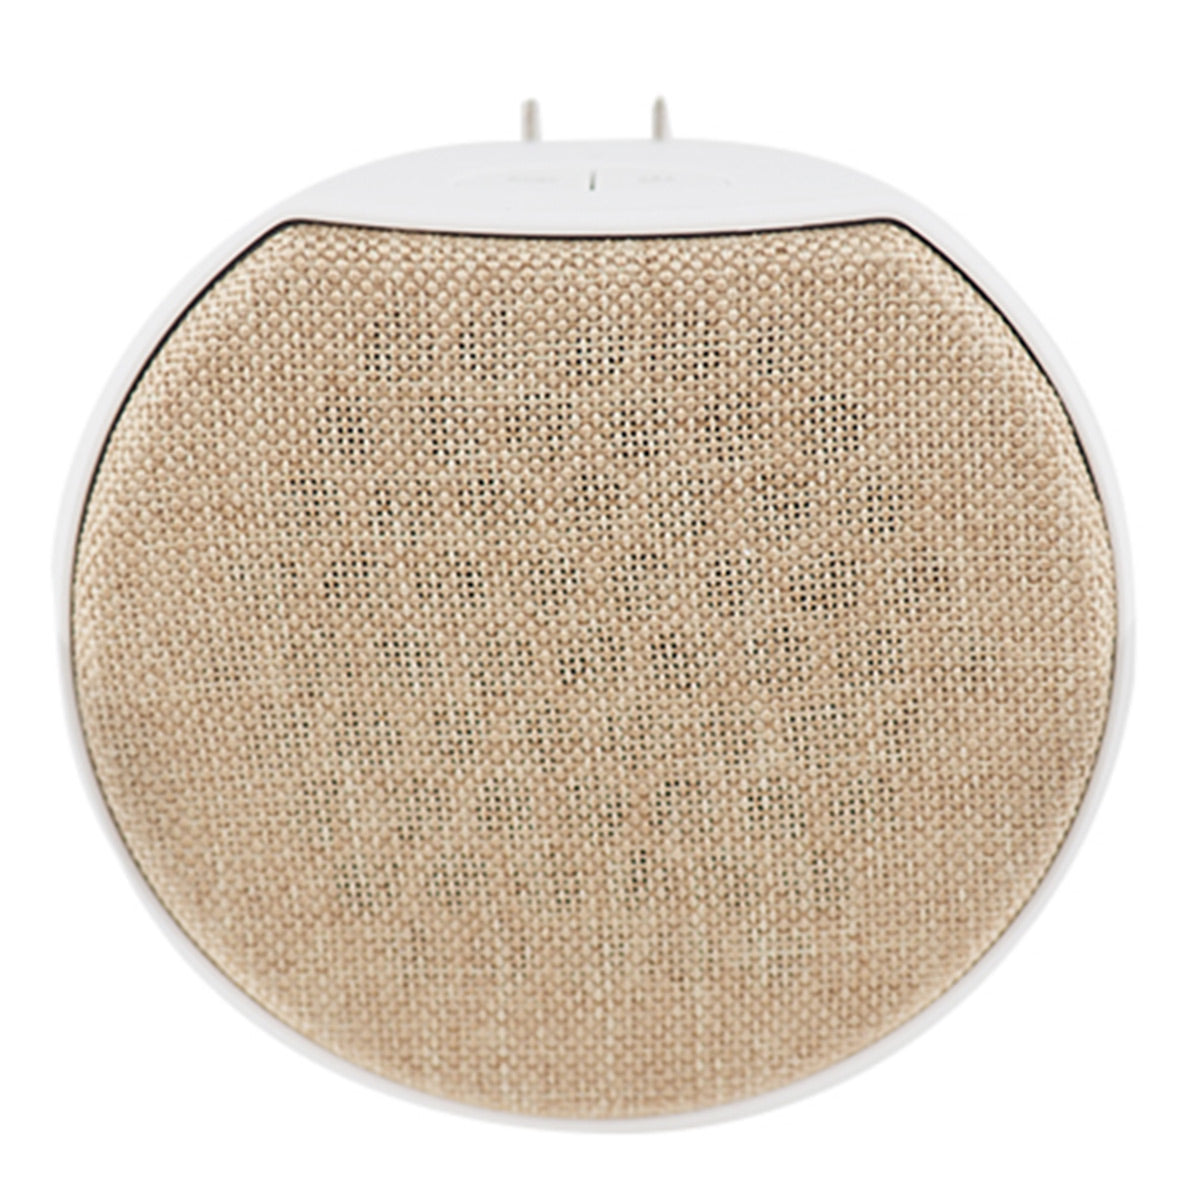 OC Acoustic Newport Plug-in Outlet Speaker with Bluetooth 5.1 and Built-in USB Type-A Charging Port - Pair (Champagne/White)